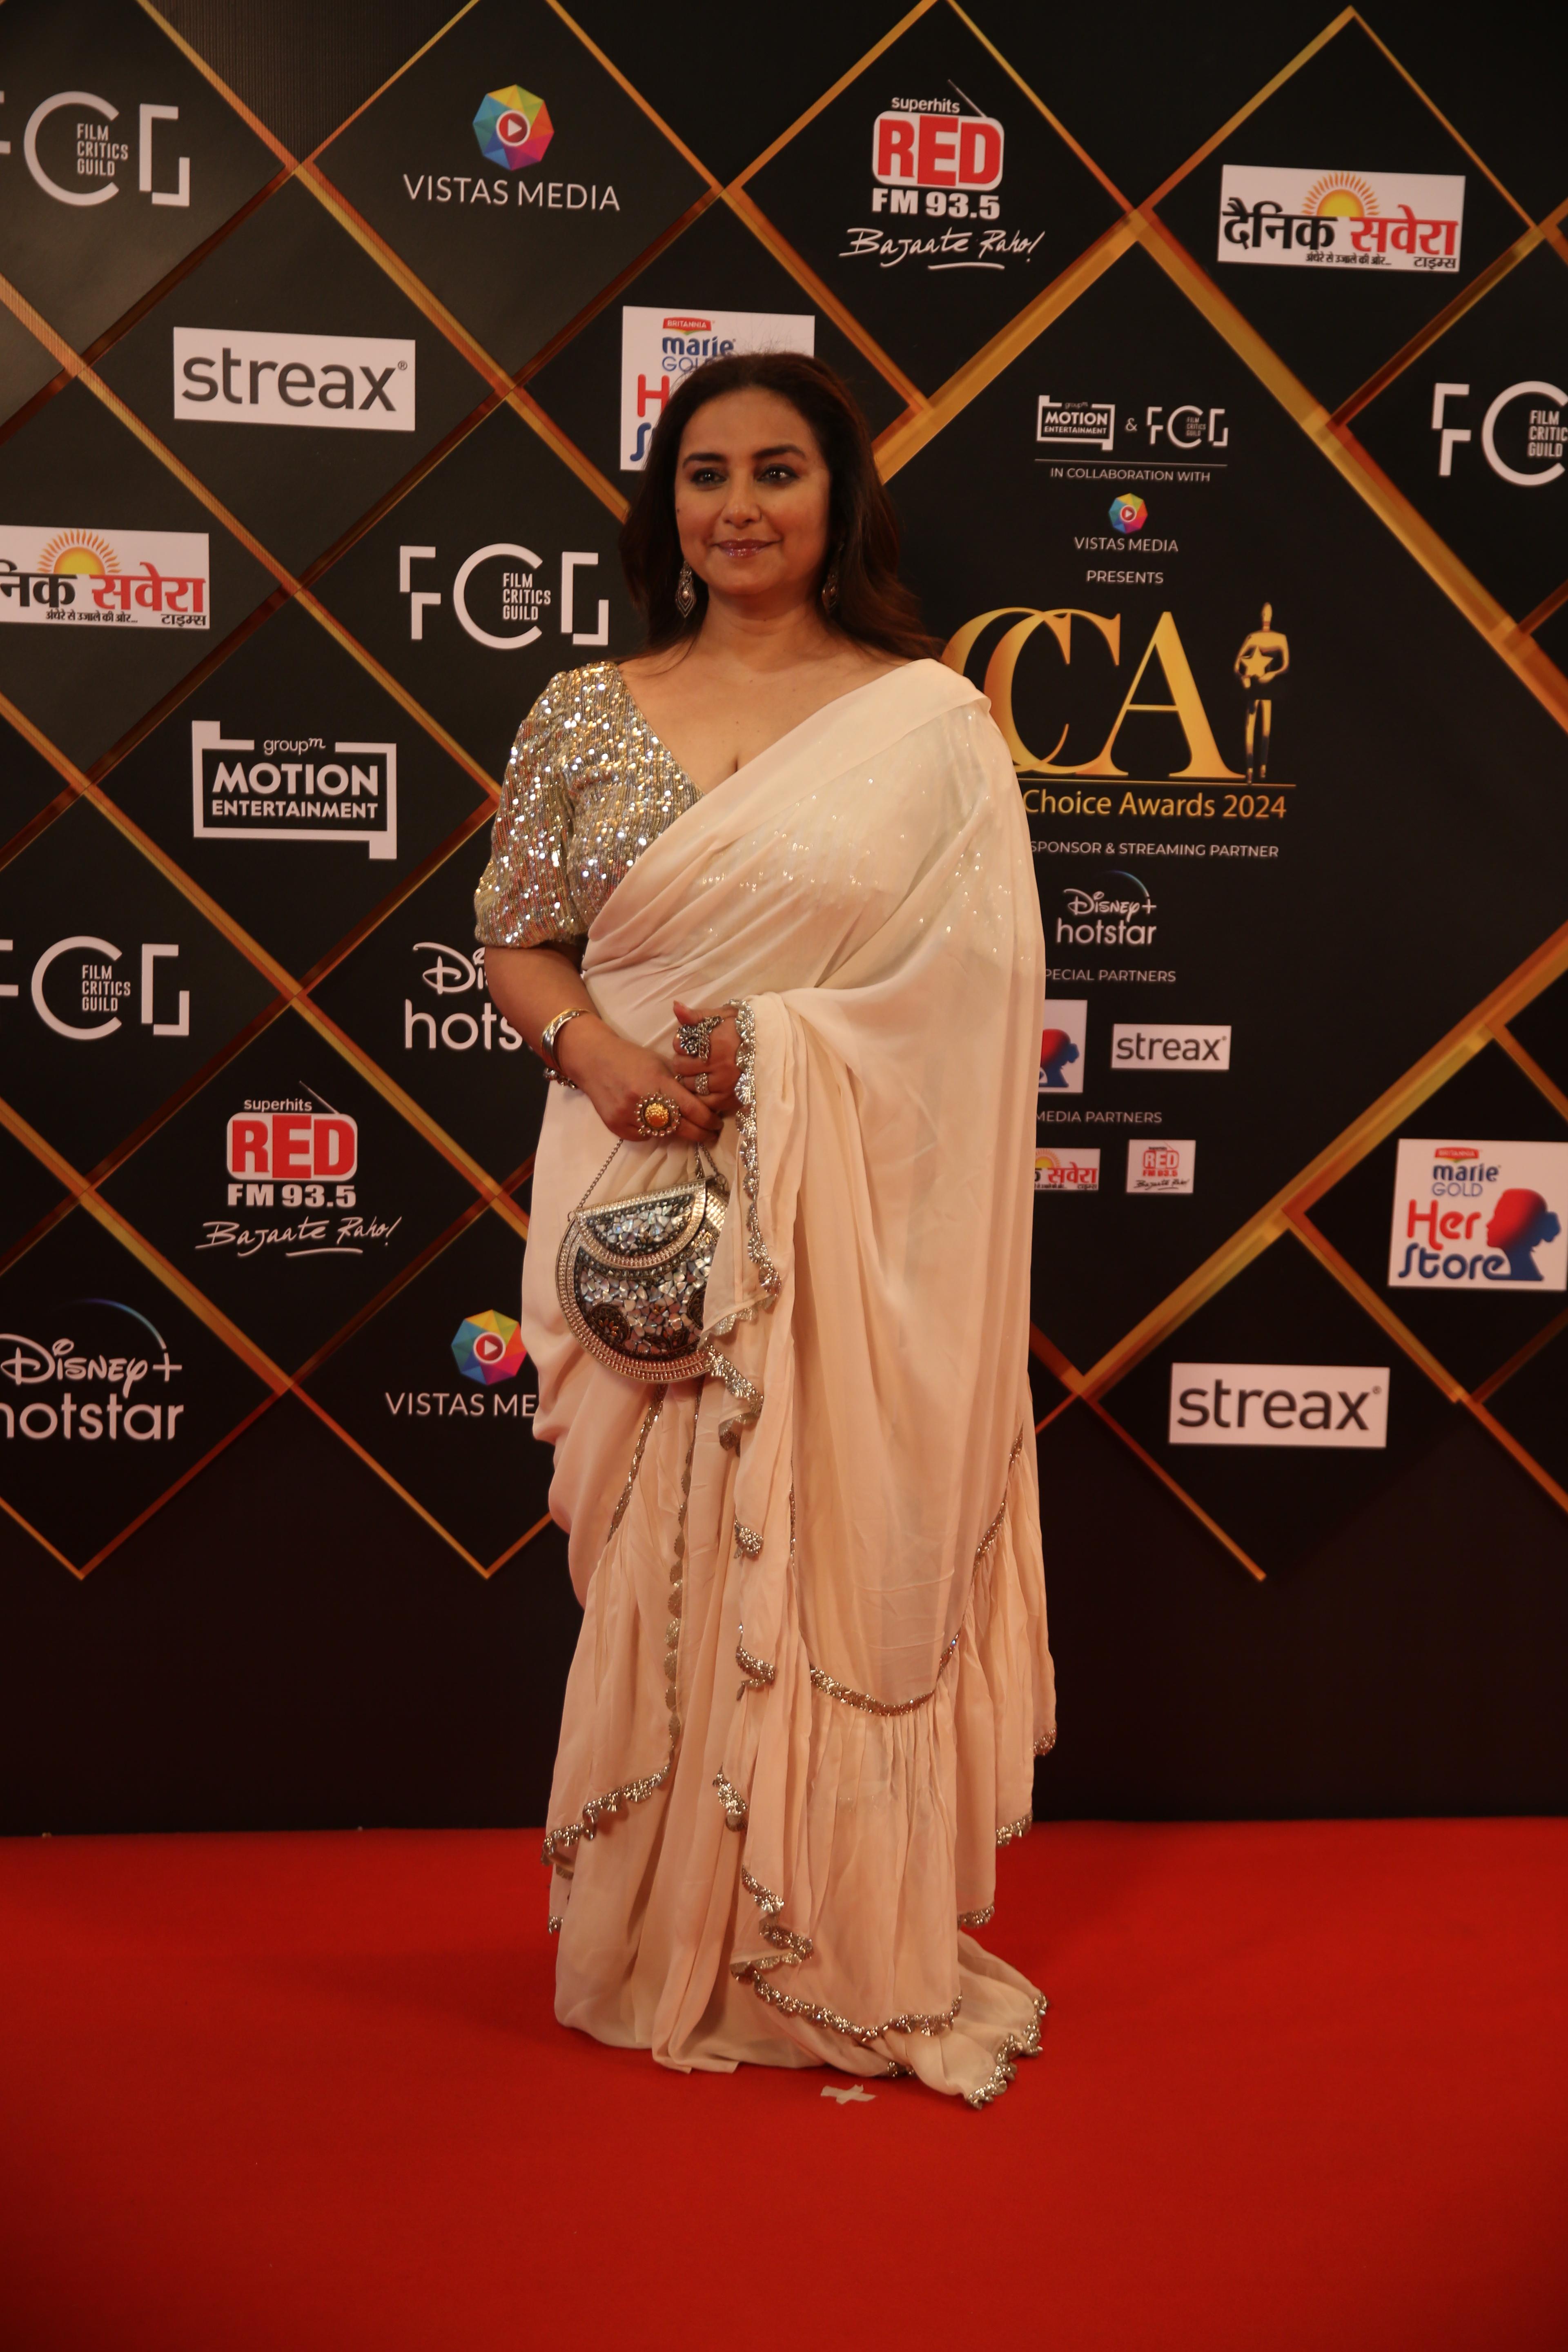 Divya Dutta looked like the picture of elegance as she posed for all the cameras